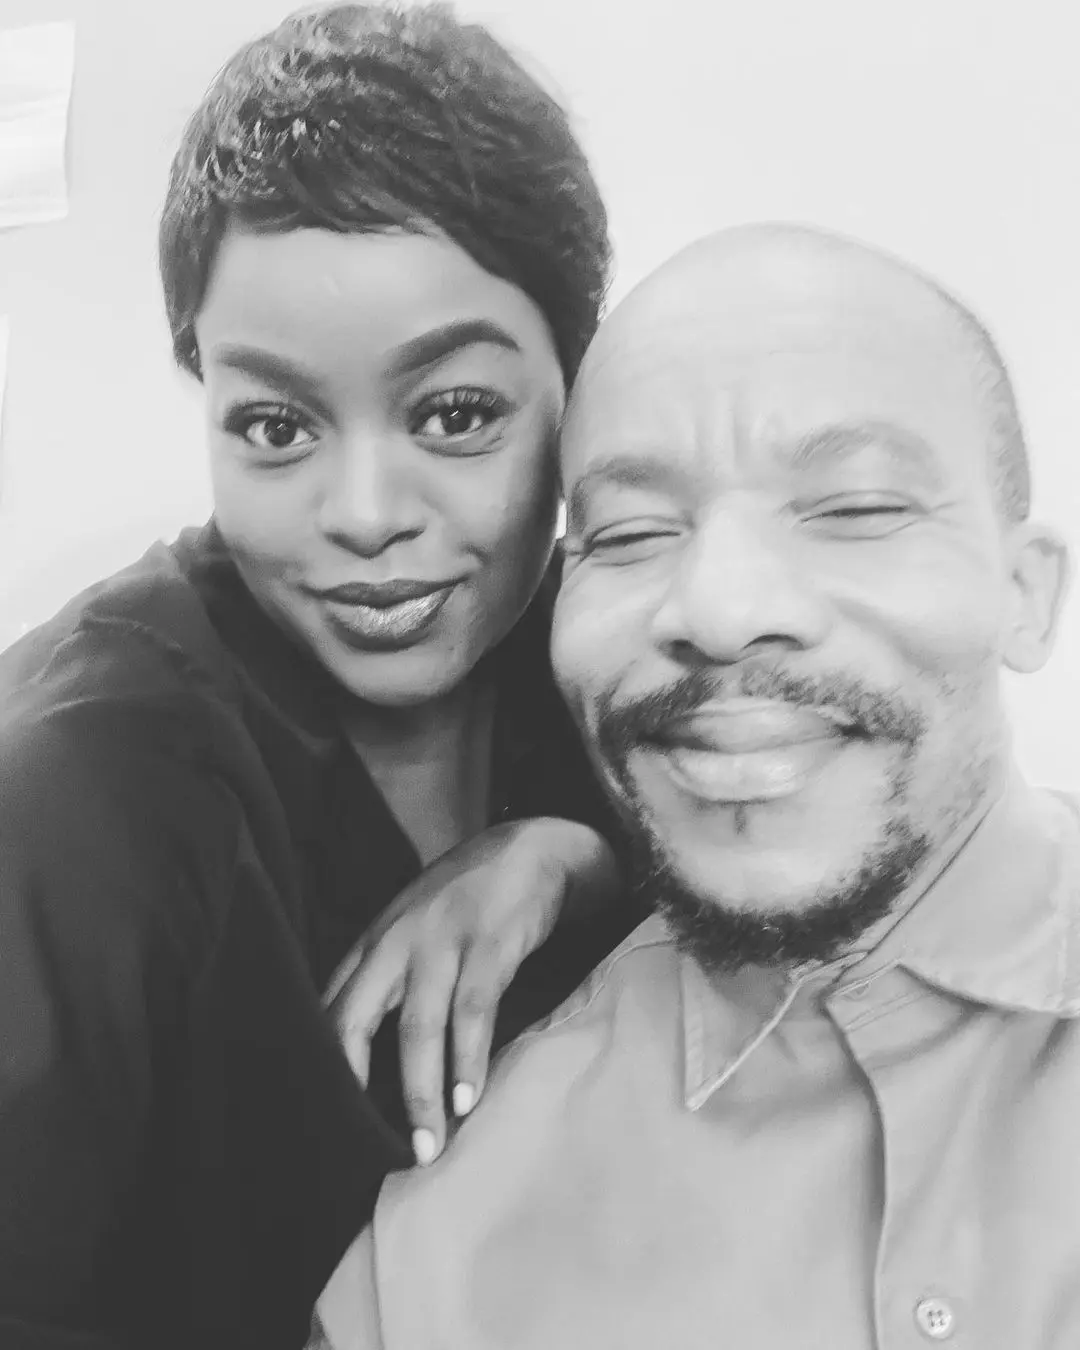 Actor Mduduzi Mabaso’s on-screen wife can’t get enough of him